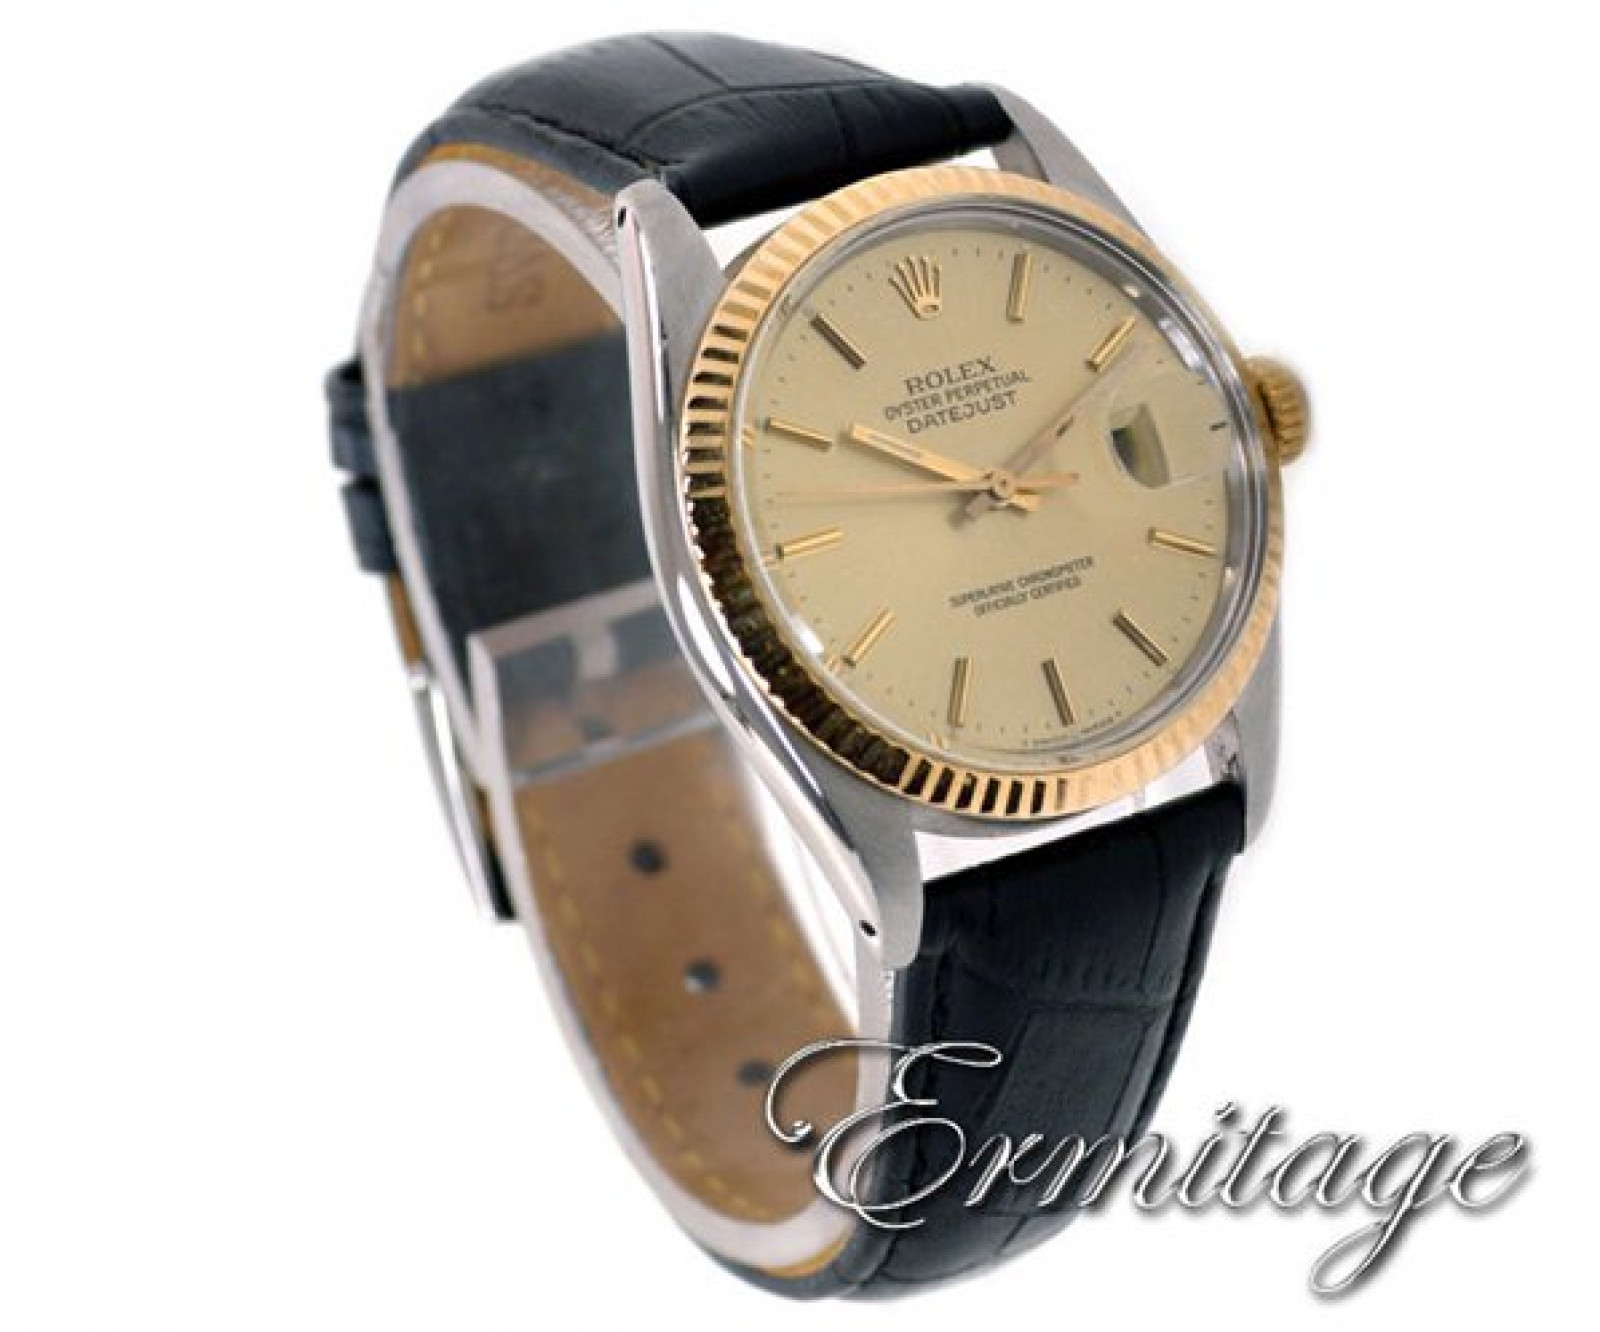 Rolex Datejust 16013 Gold & Steel with Leather Strap